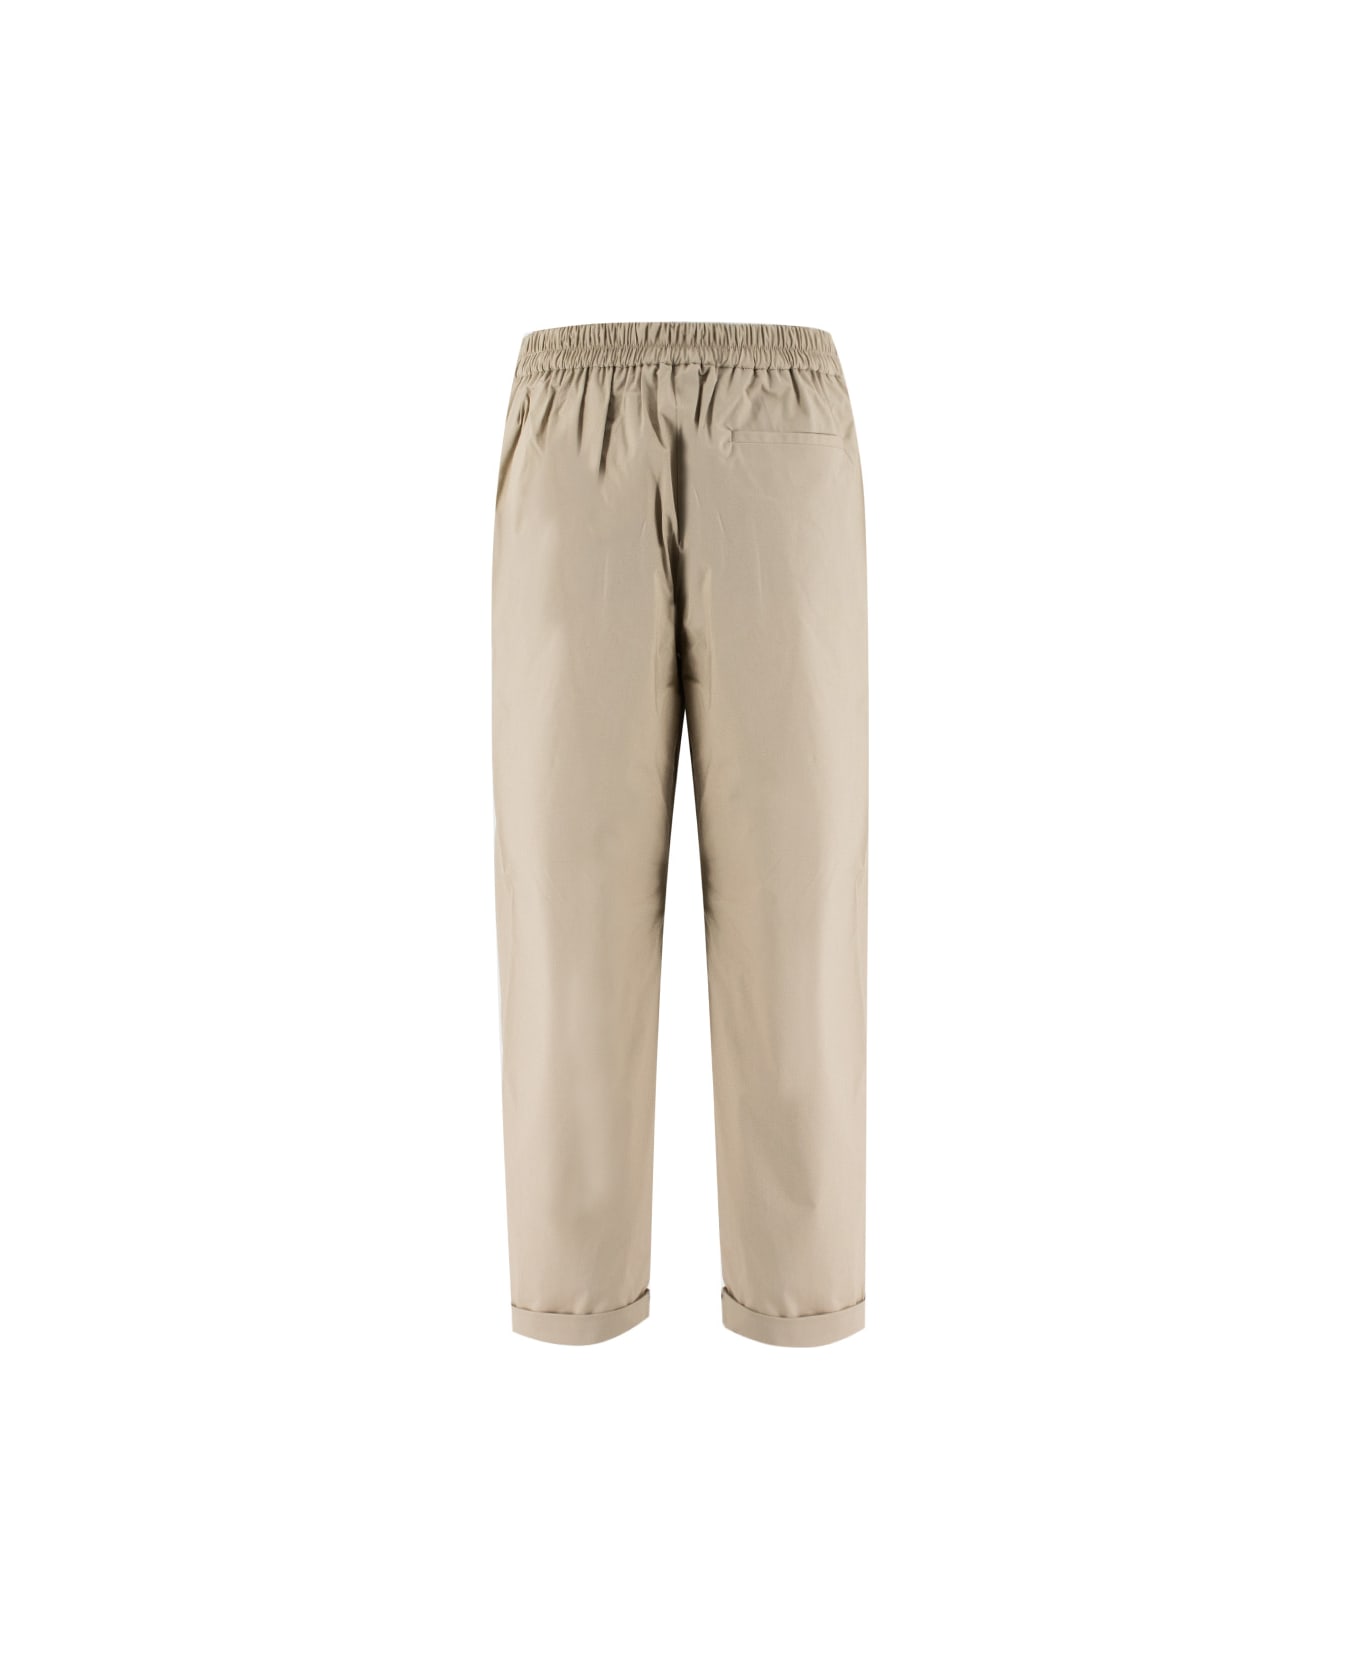 Le Tricot Perugia Trousers - BEIGE_GOLD_SILVER LX ボトムス